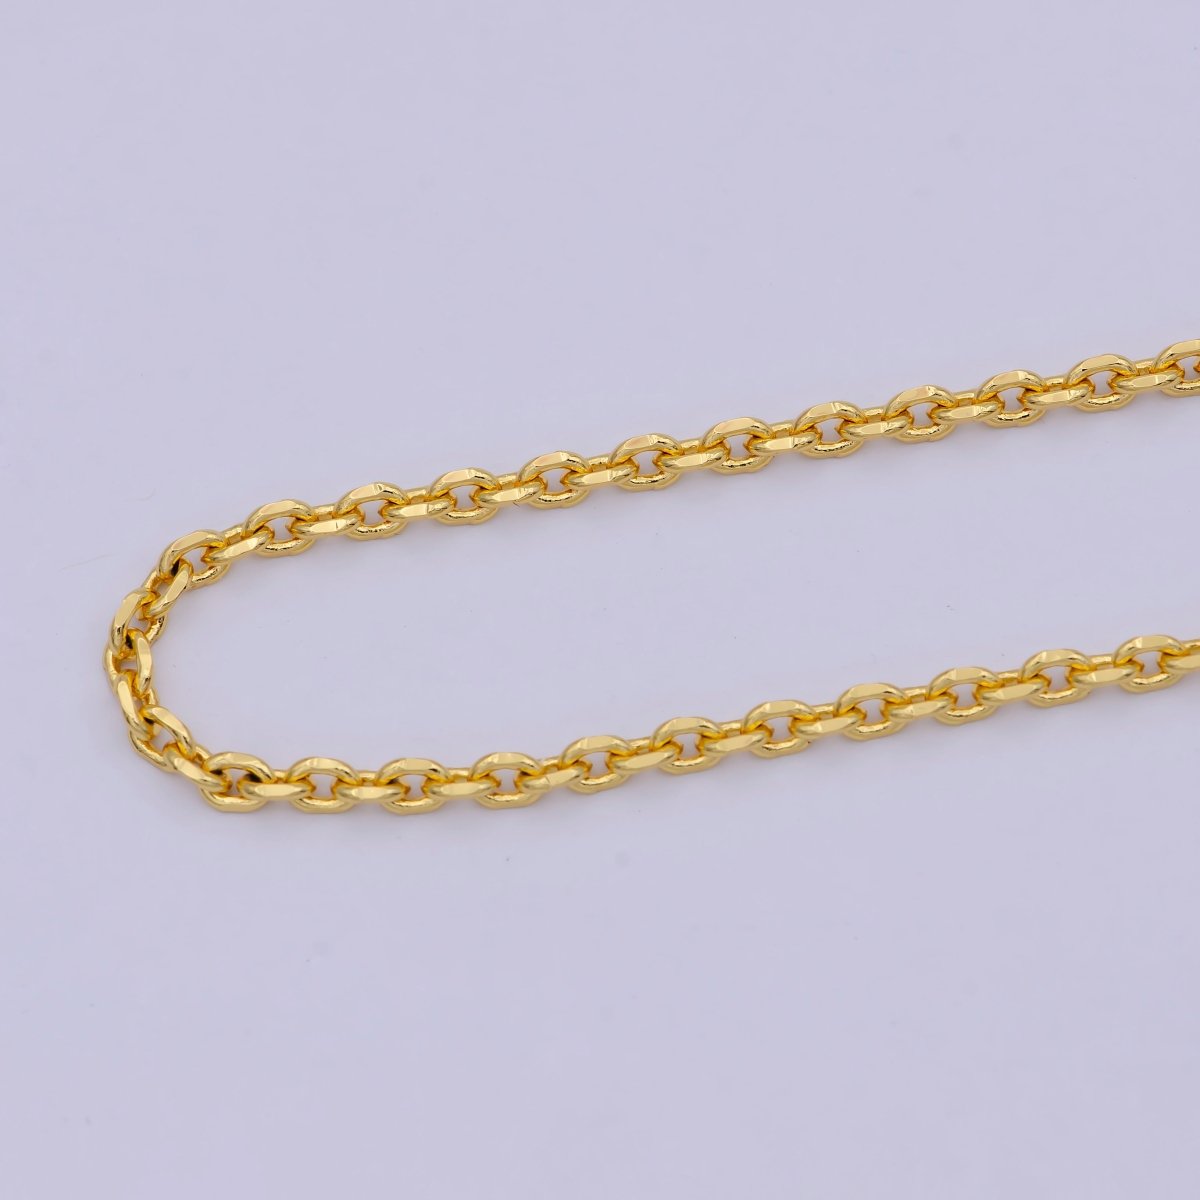 17.7'' Ready to Use 24K Gold Filled Thin Cable Necklace Chain, Layering Cable Chain Dainty Necklace, For Pendant Charm Necklace Making | WA-745 Clearance Pricing - DLUXCA